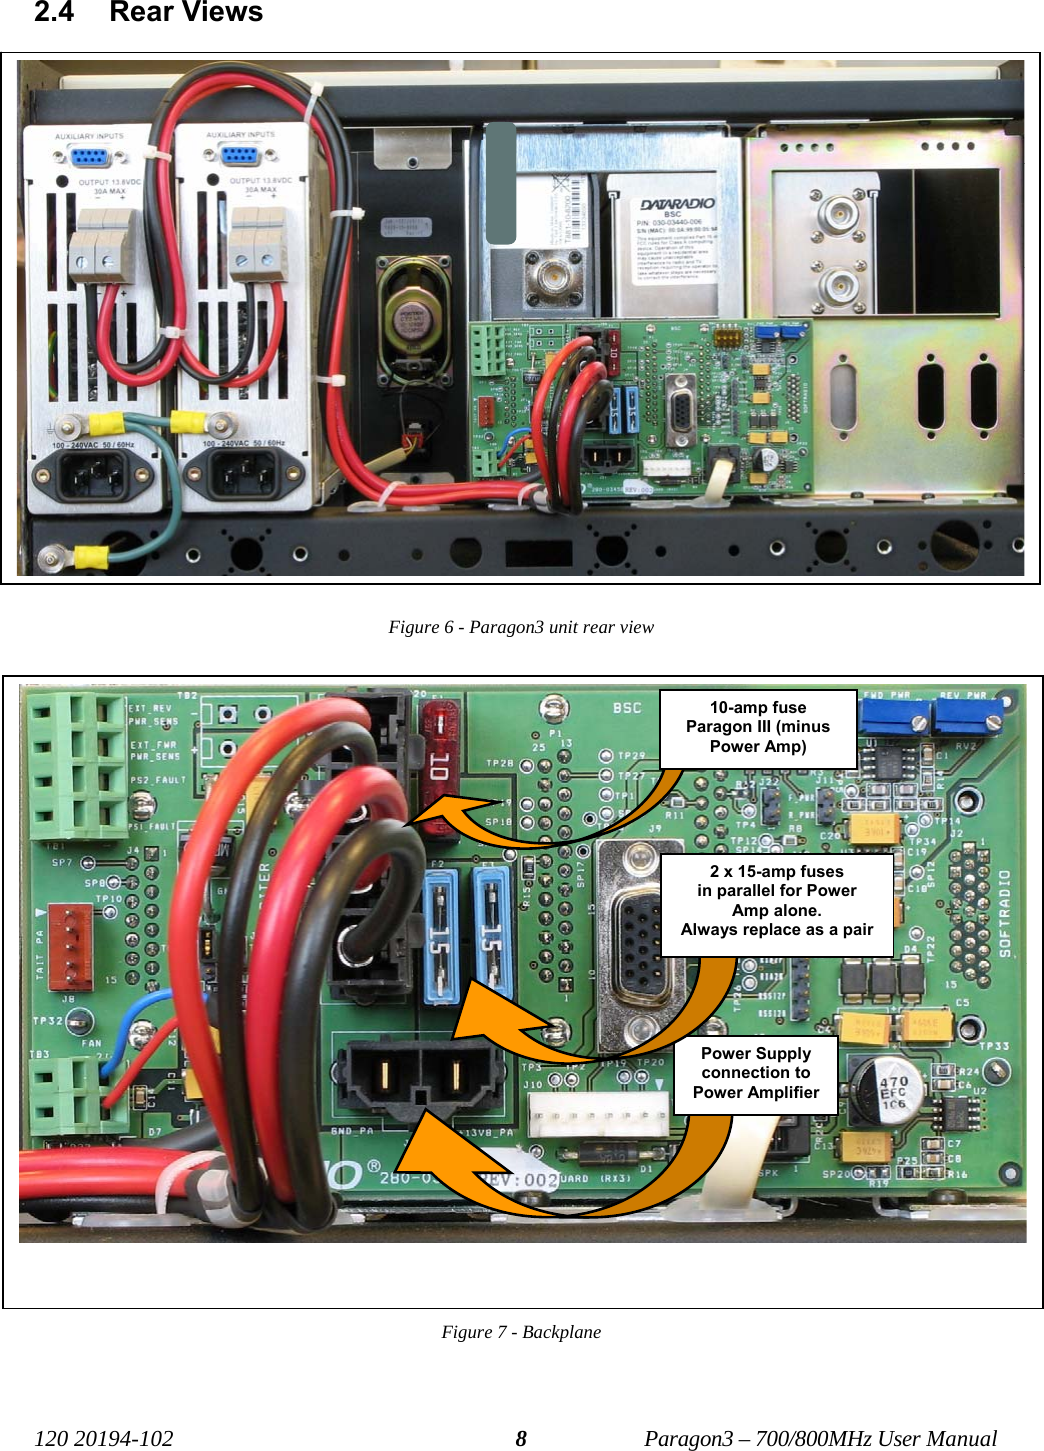   120 20194-102   Paragon3 – 700/800MHz User Manual 82.4 Rear Views  Figure 6 - Paragon3 unit rear view Figure 7 - Backplane   Power Supply connection to Power Amplifier 10-amp fuse Paragon III (minus Power Amp) 2 x 15-amp fuses in parallel for Power Amp alone. Always replace as a pair 